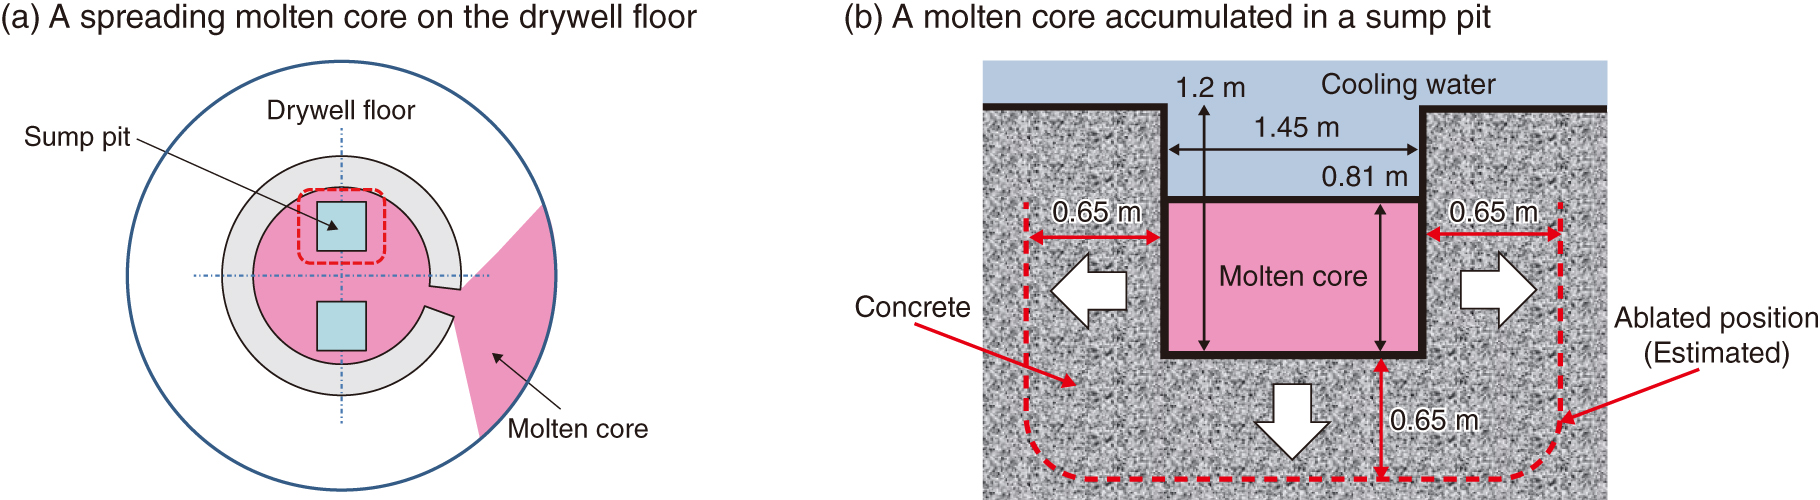 Fig.1-7  Image of a spreading molten core on the drywell floor of a containment vessel